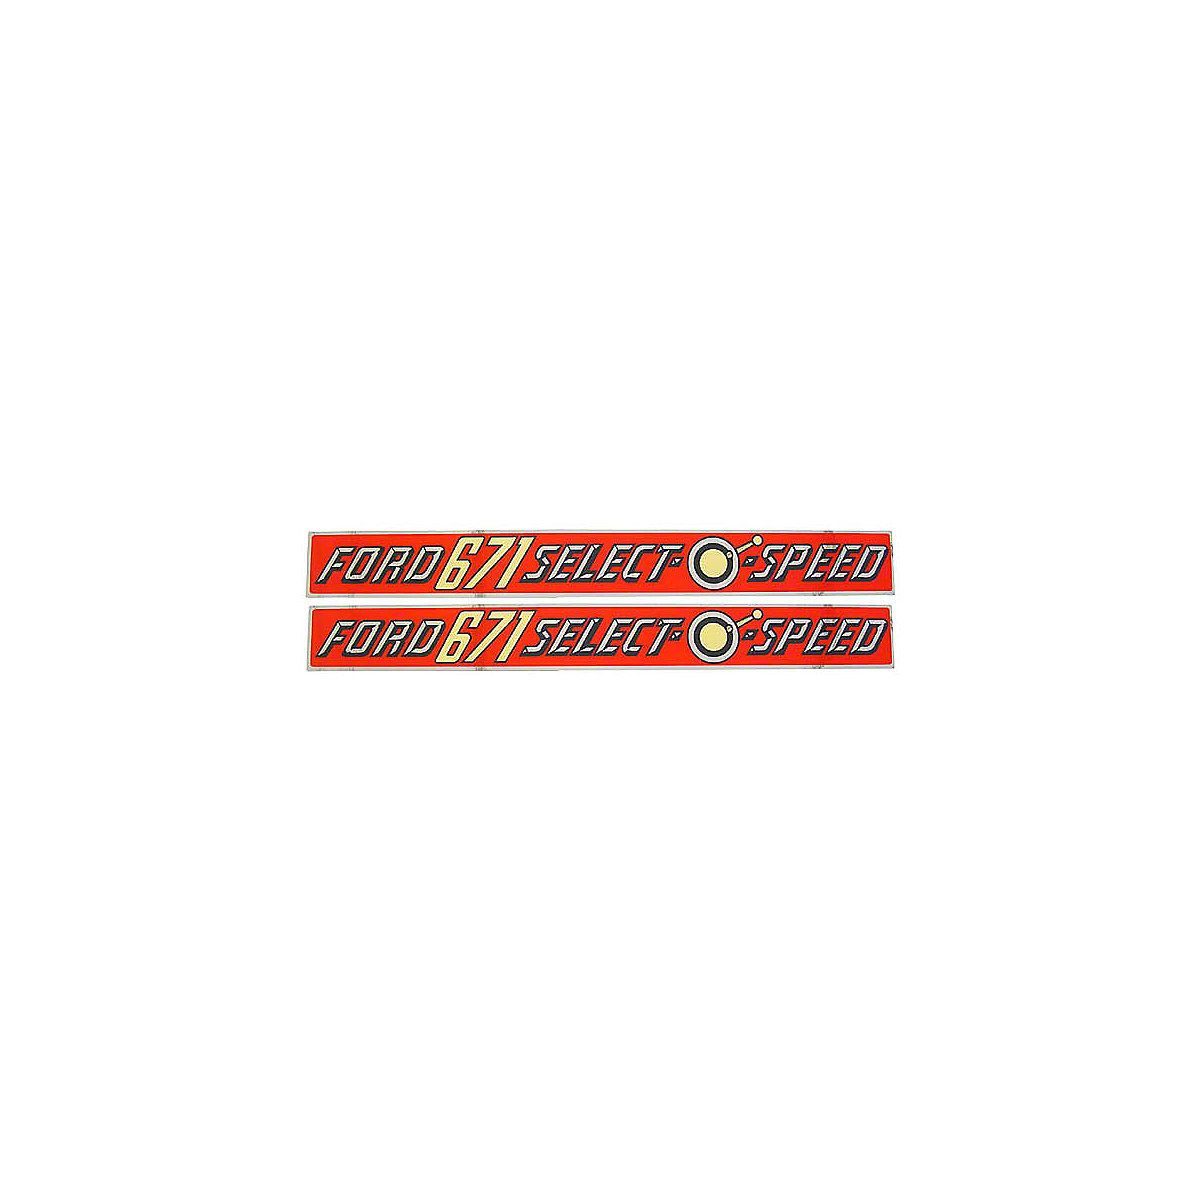 UF81577    Hood Decal Pair  671 Select-O-Speed